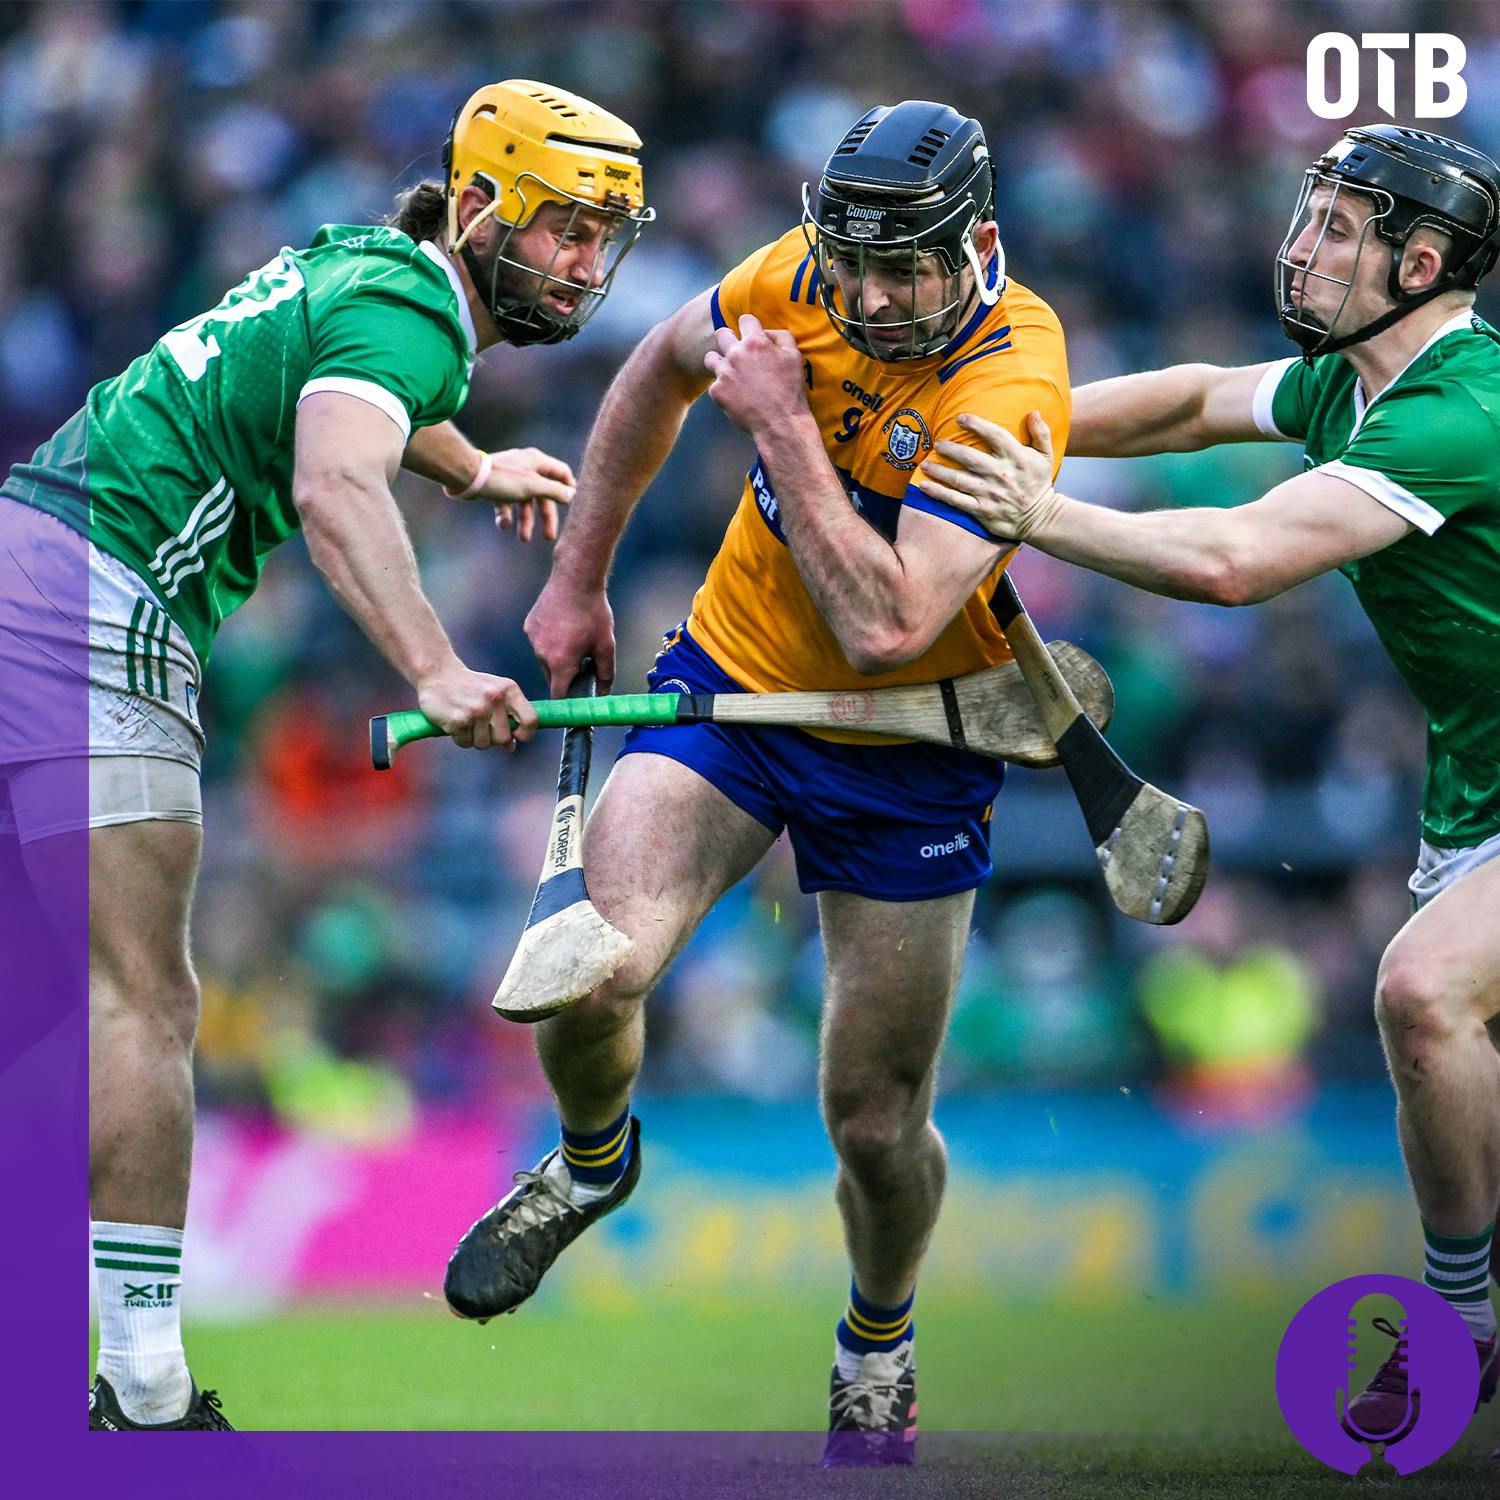 Provincial Finals preview, Shefflin in trouble and the importance of celebrating – SATURDAY PANEL